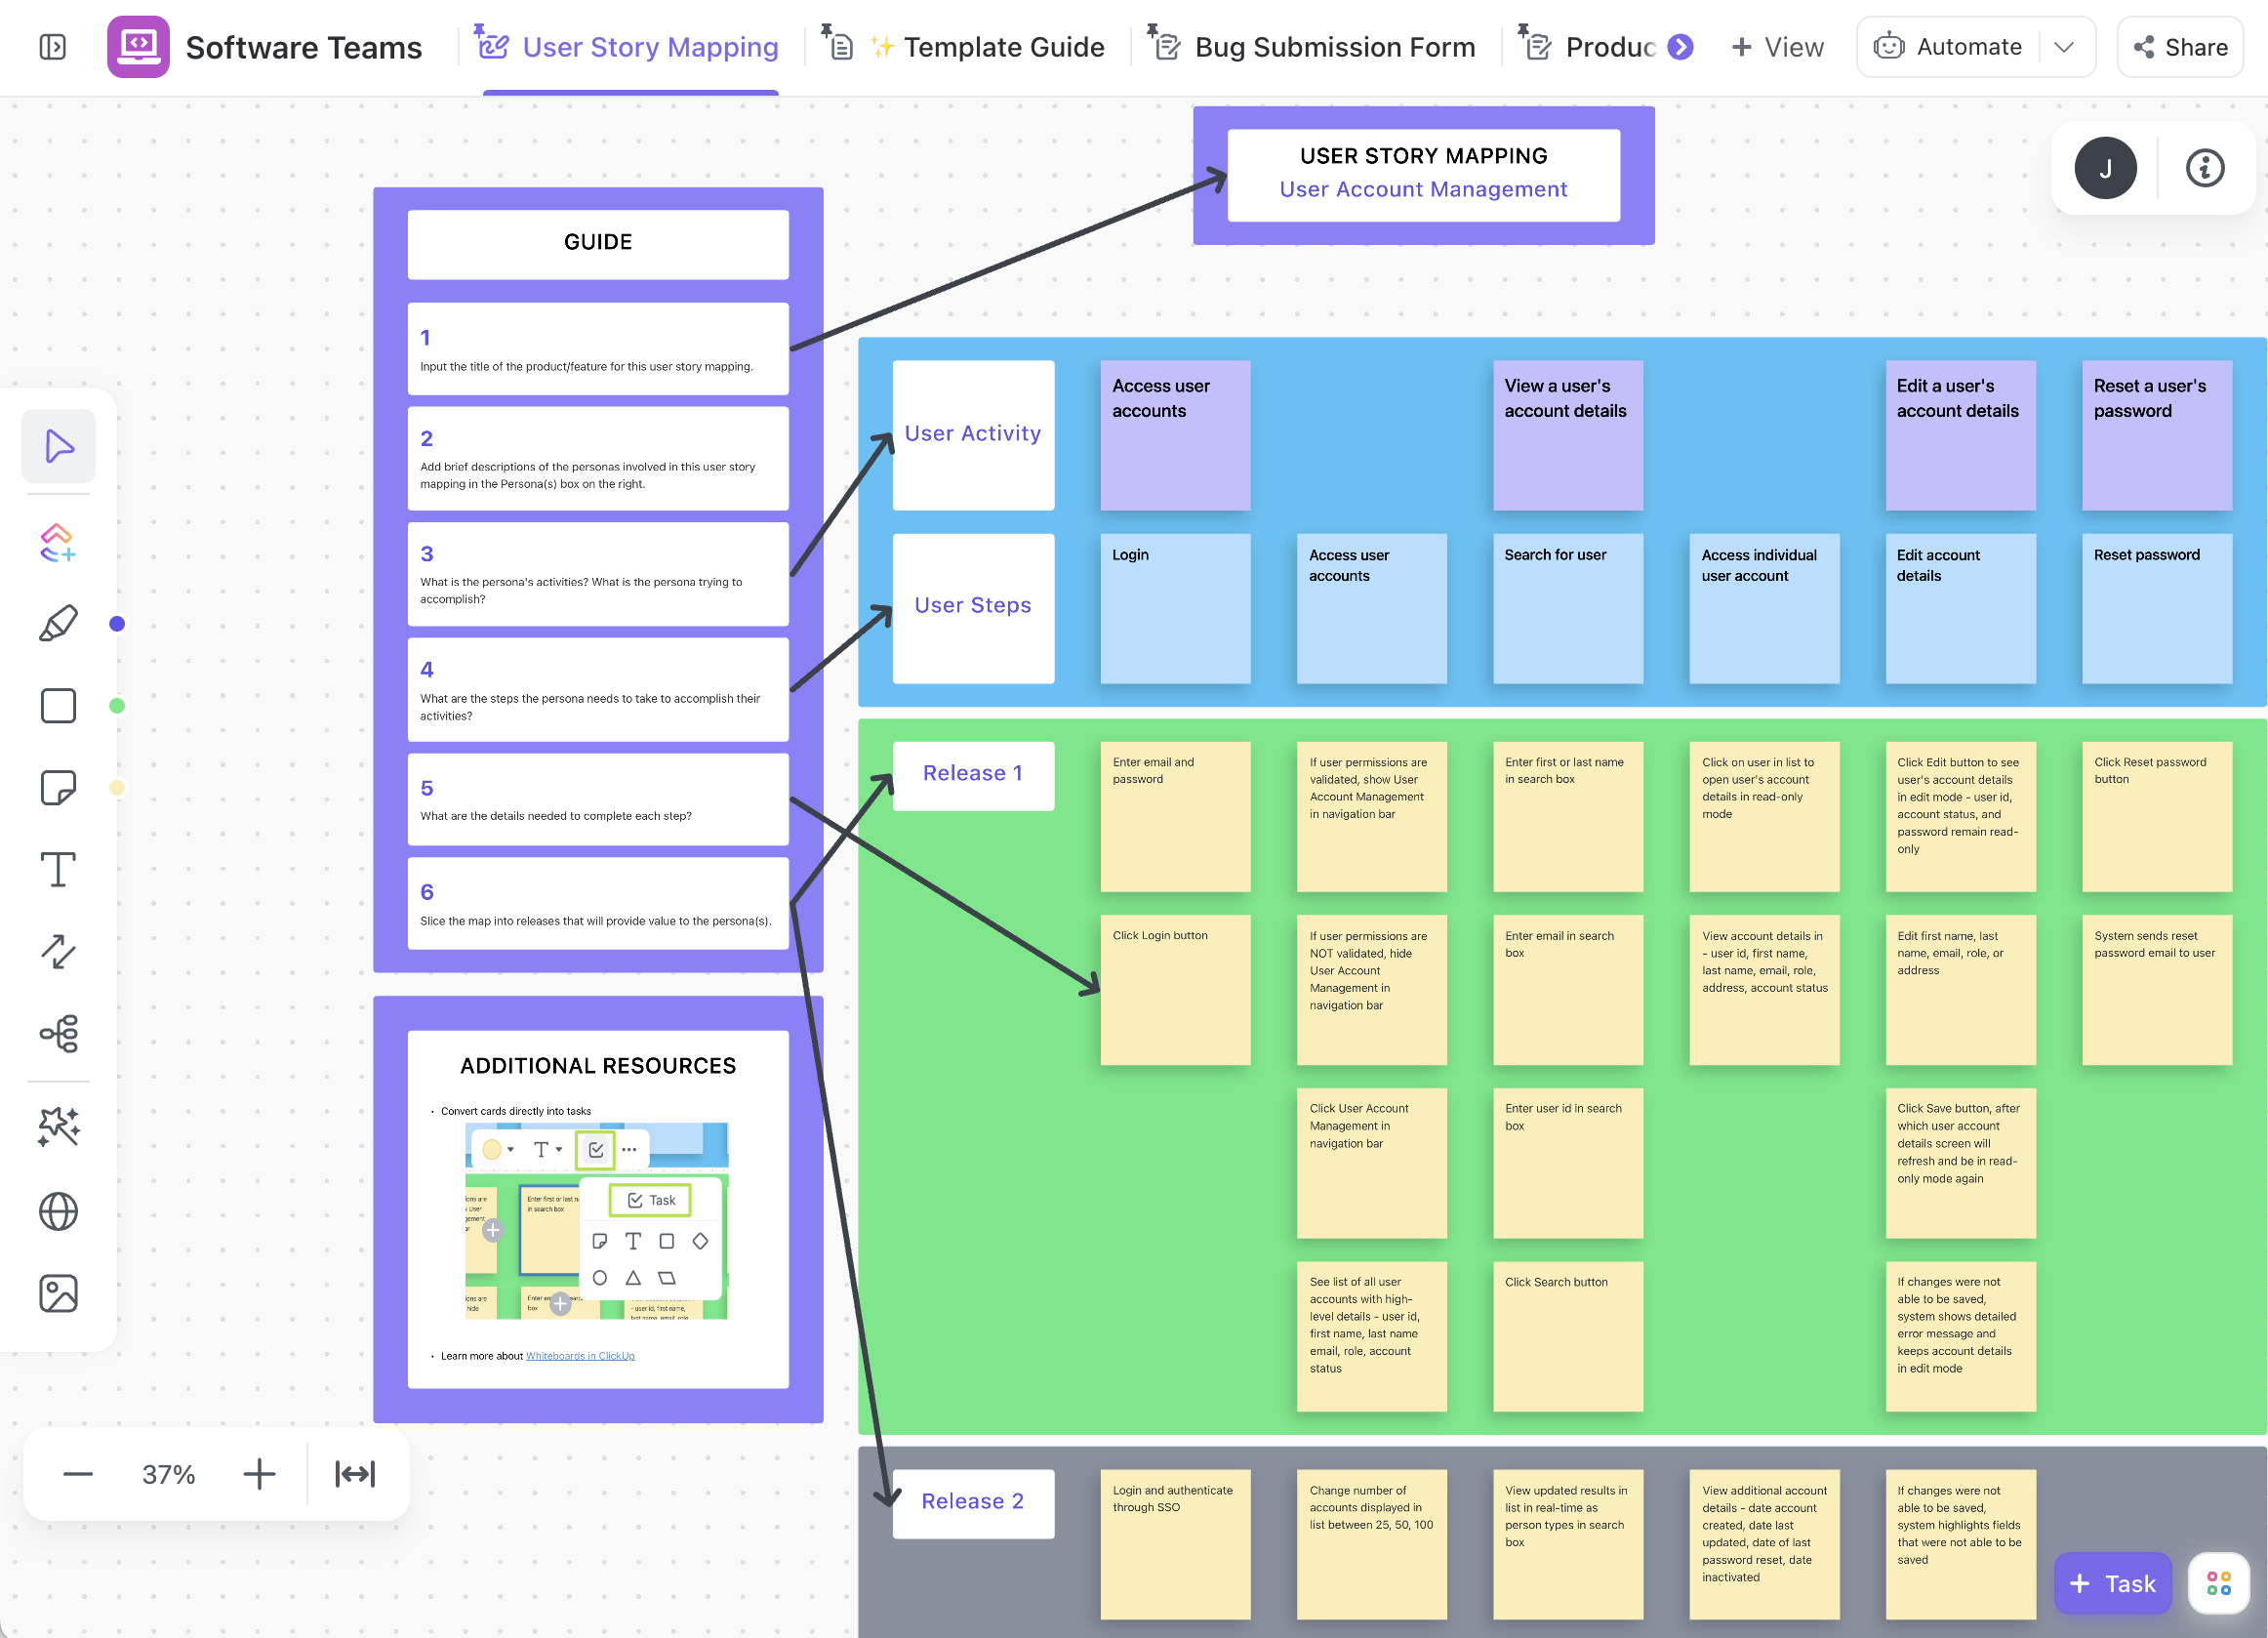 LevelUp Speaker Template_Software Teams User Story Mapping_02.22.23.png